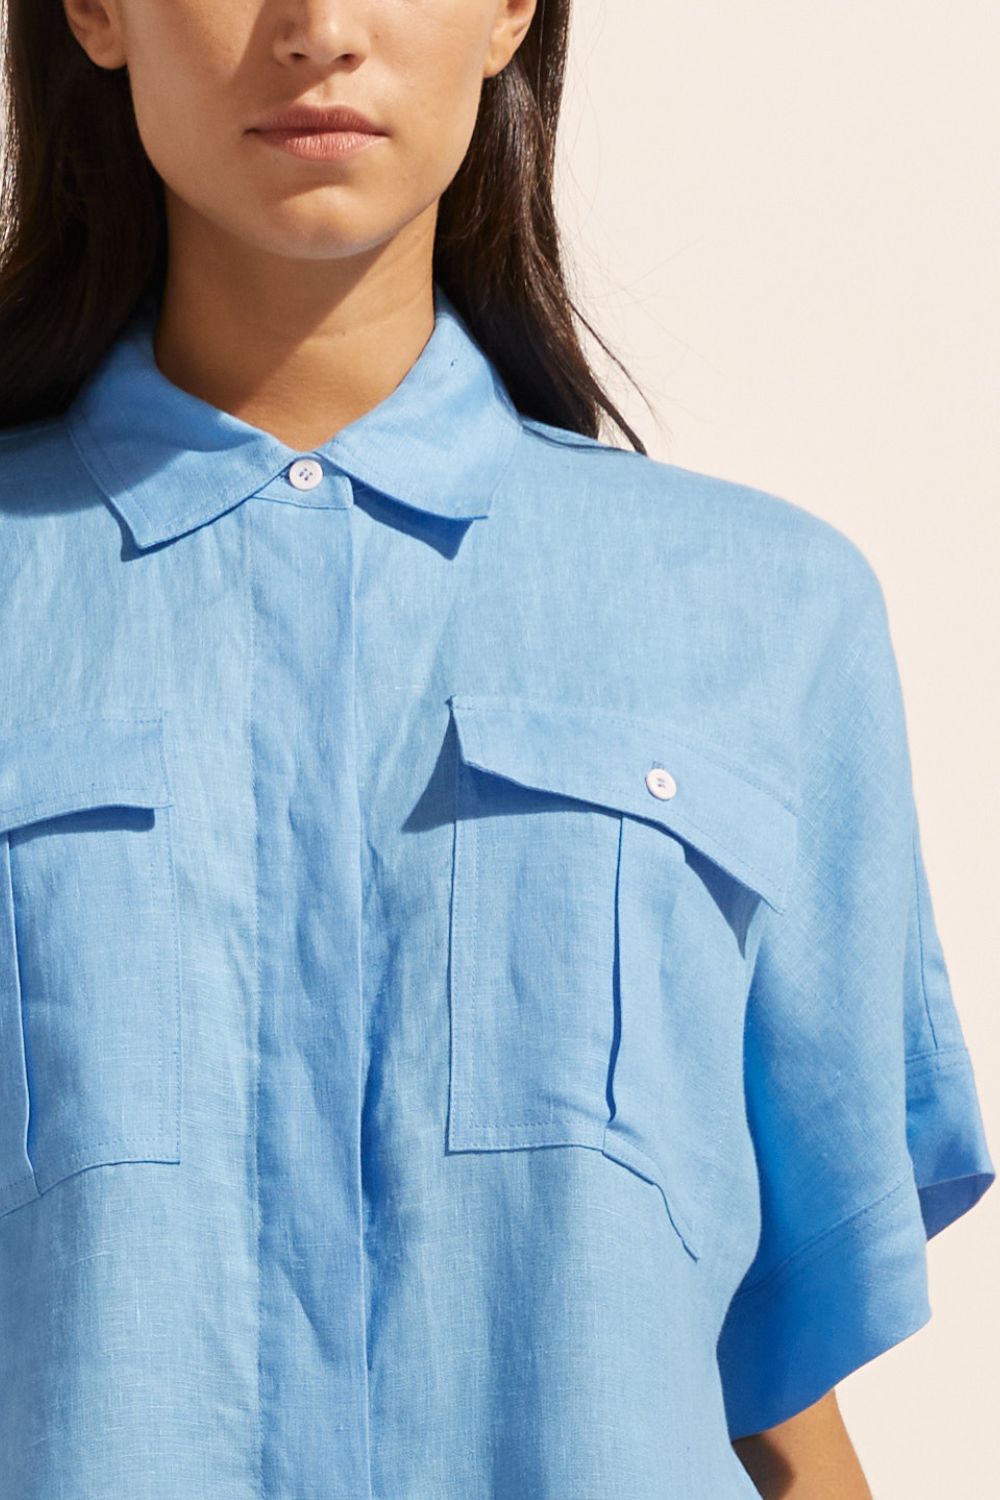 blue, jumpsuit, button down collar, oversized patch pockets, close up view